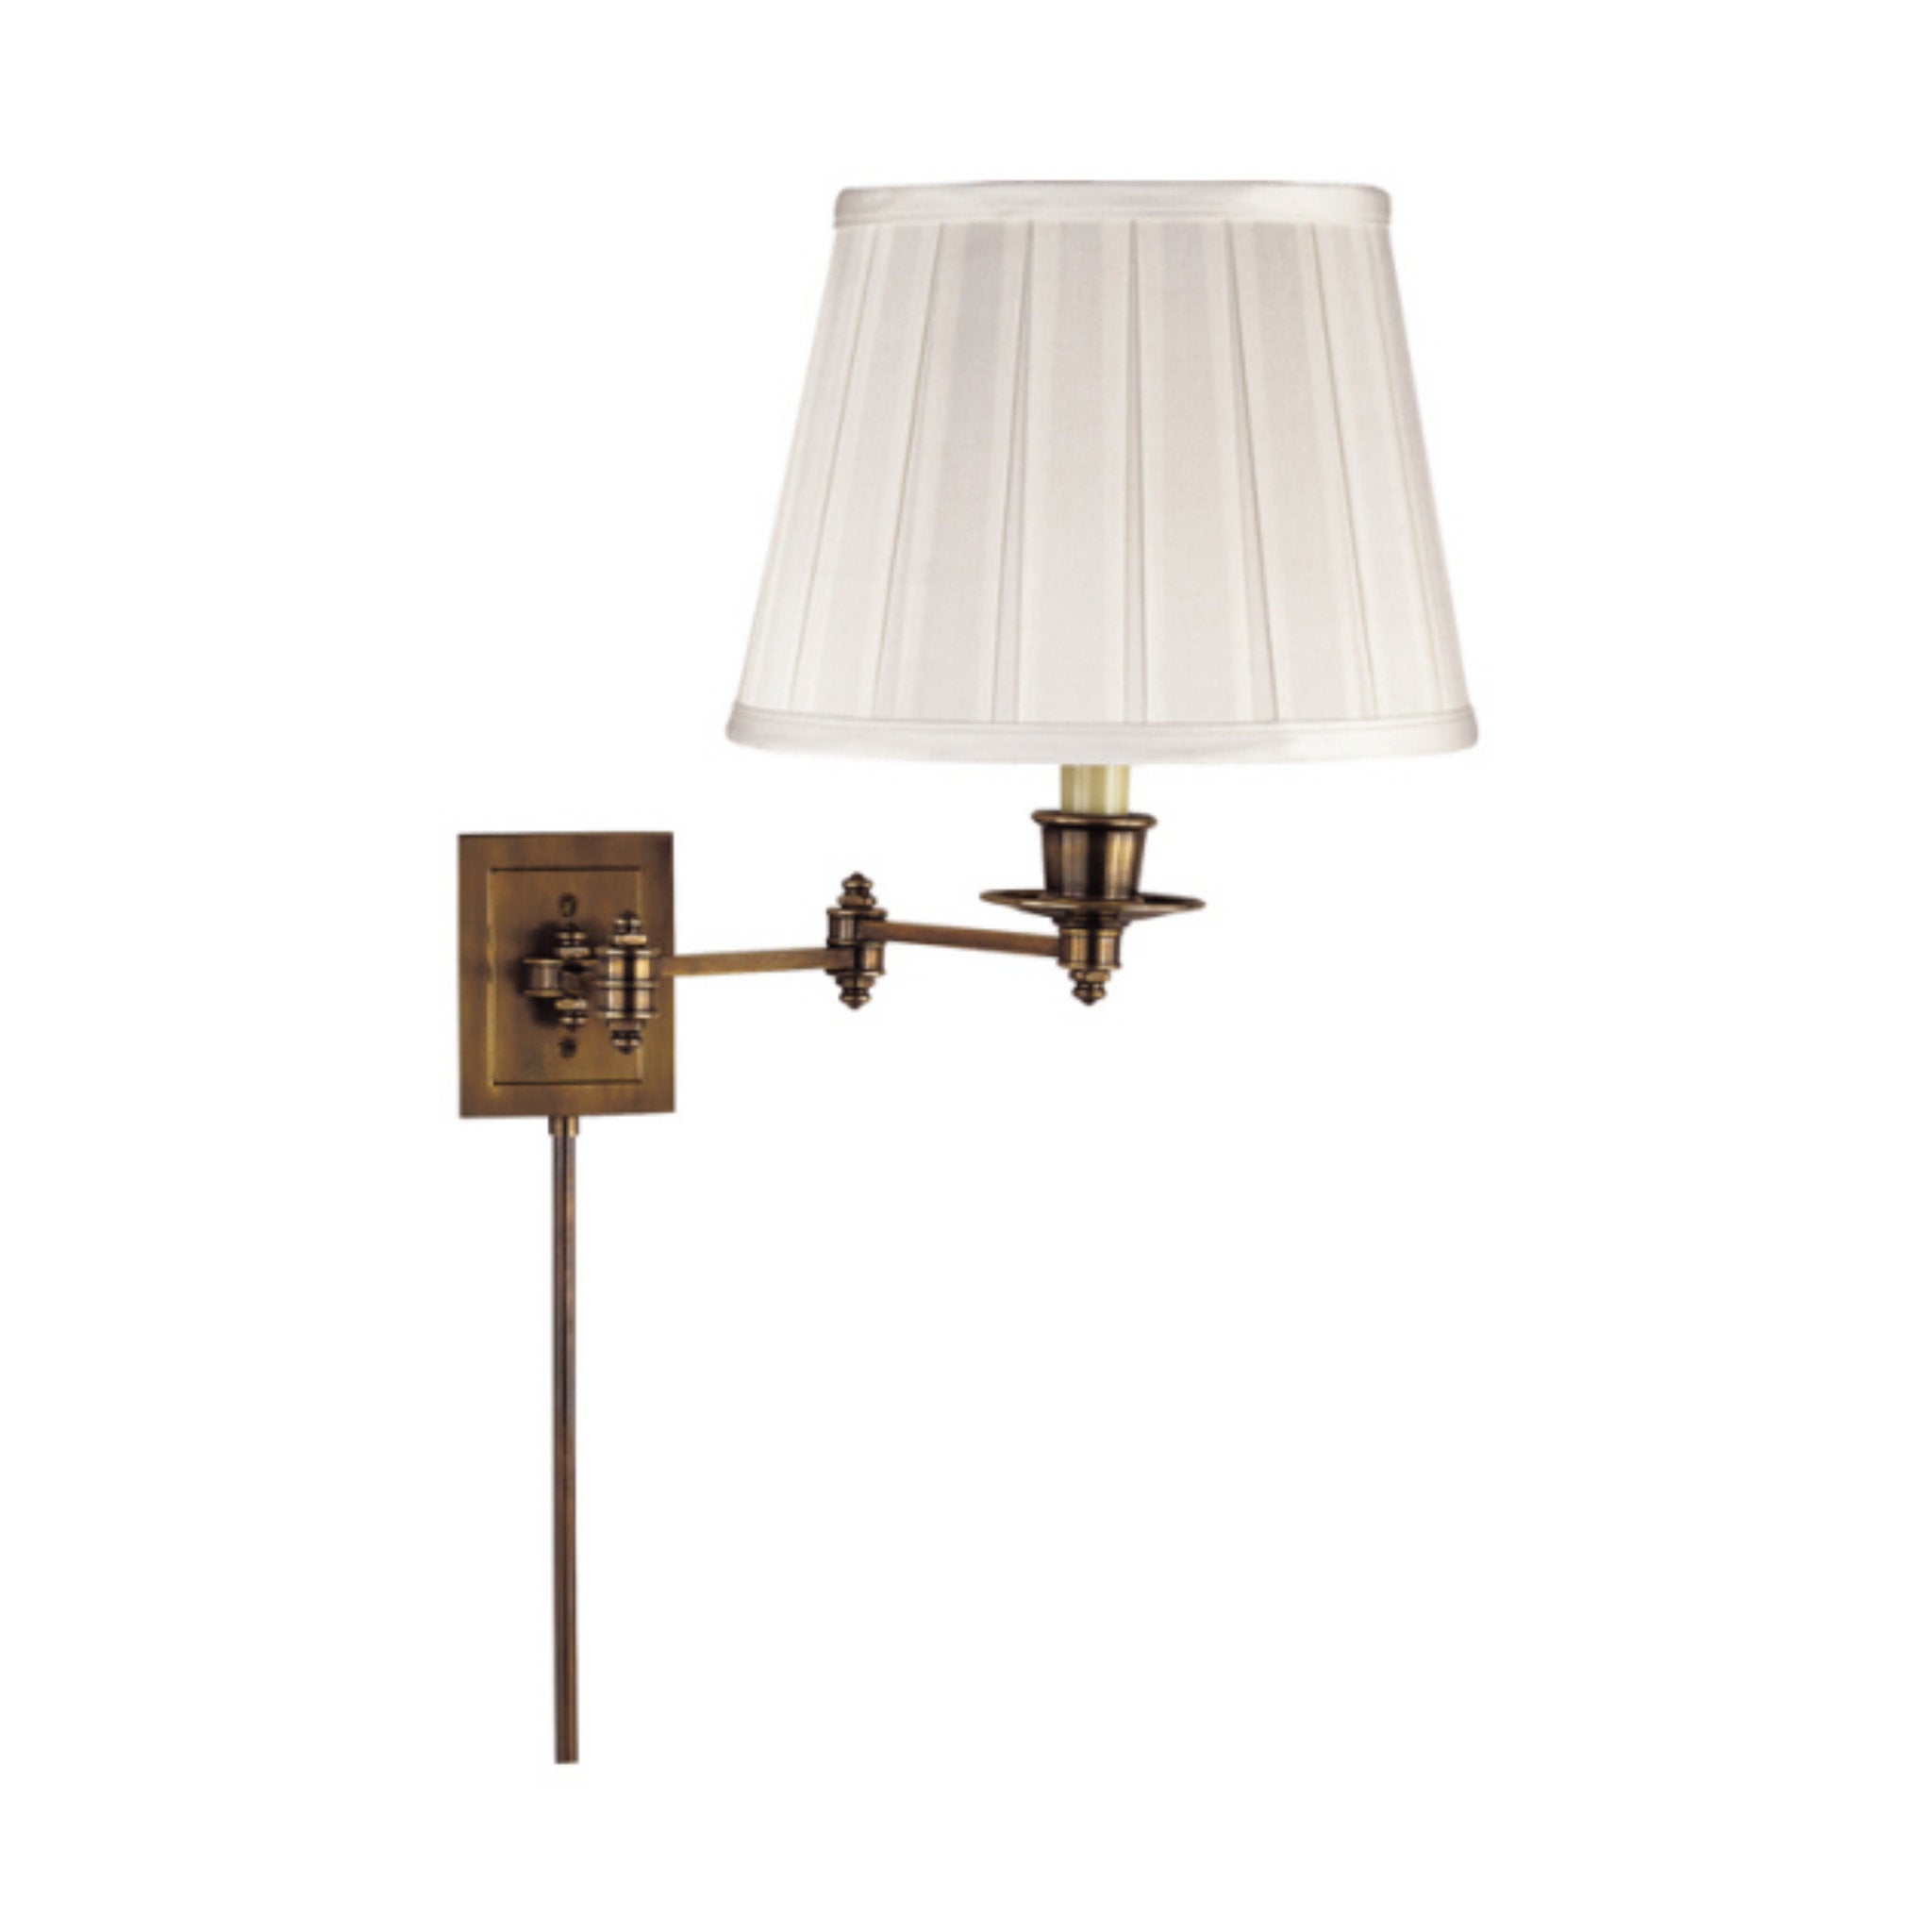 Visual Comfort Triple Swing Arm Wall Lamp in Hand-Rubbed Antique Brass with Silk Shade